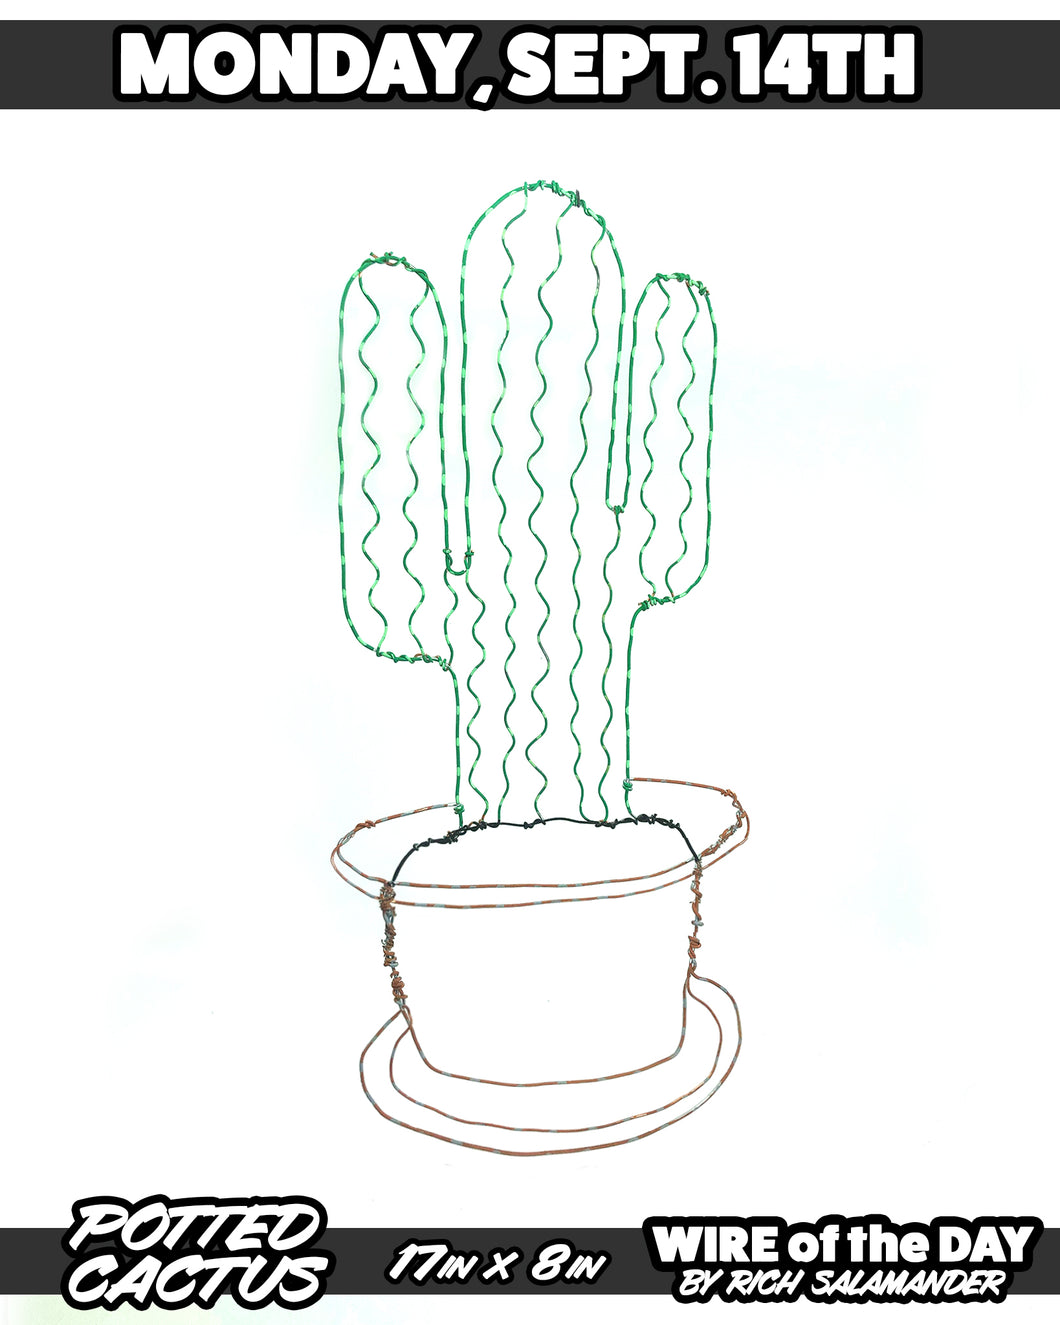 WIRE of the DAY POTTED CACTUS *